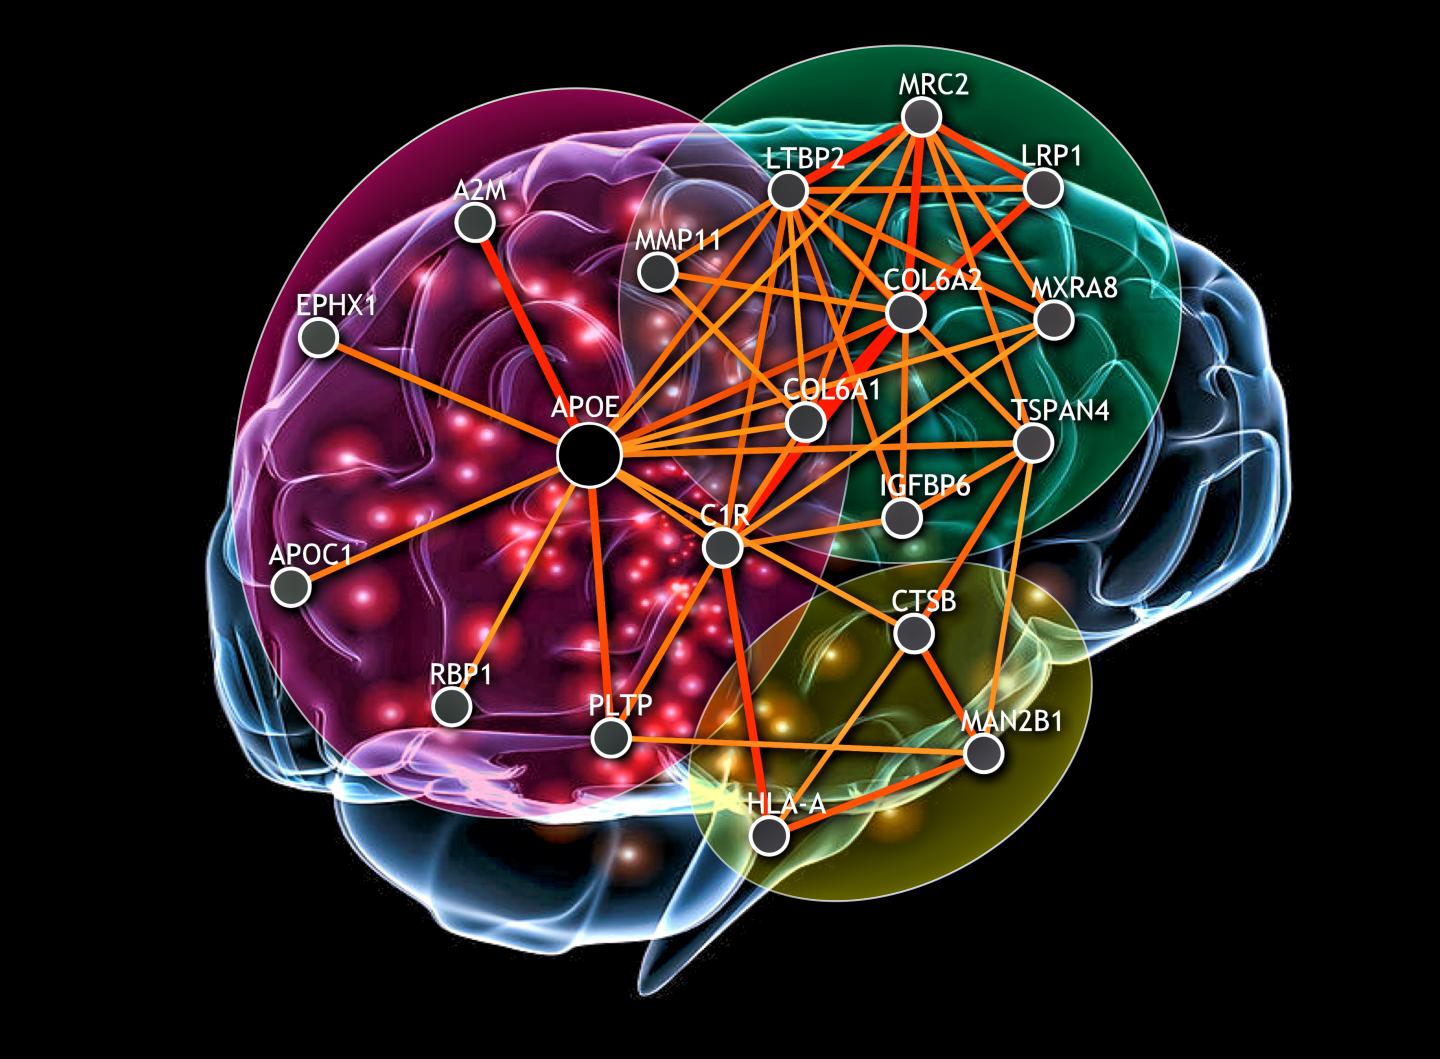 Functional Genetic Network for Whole Brain